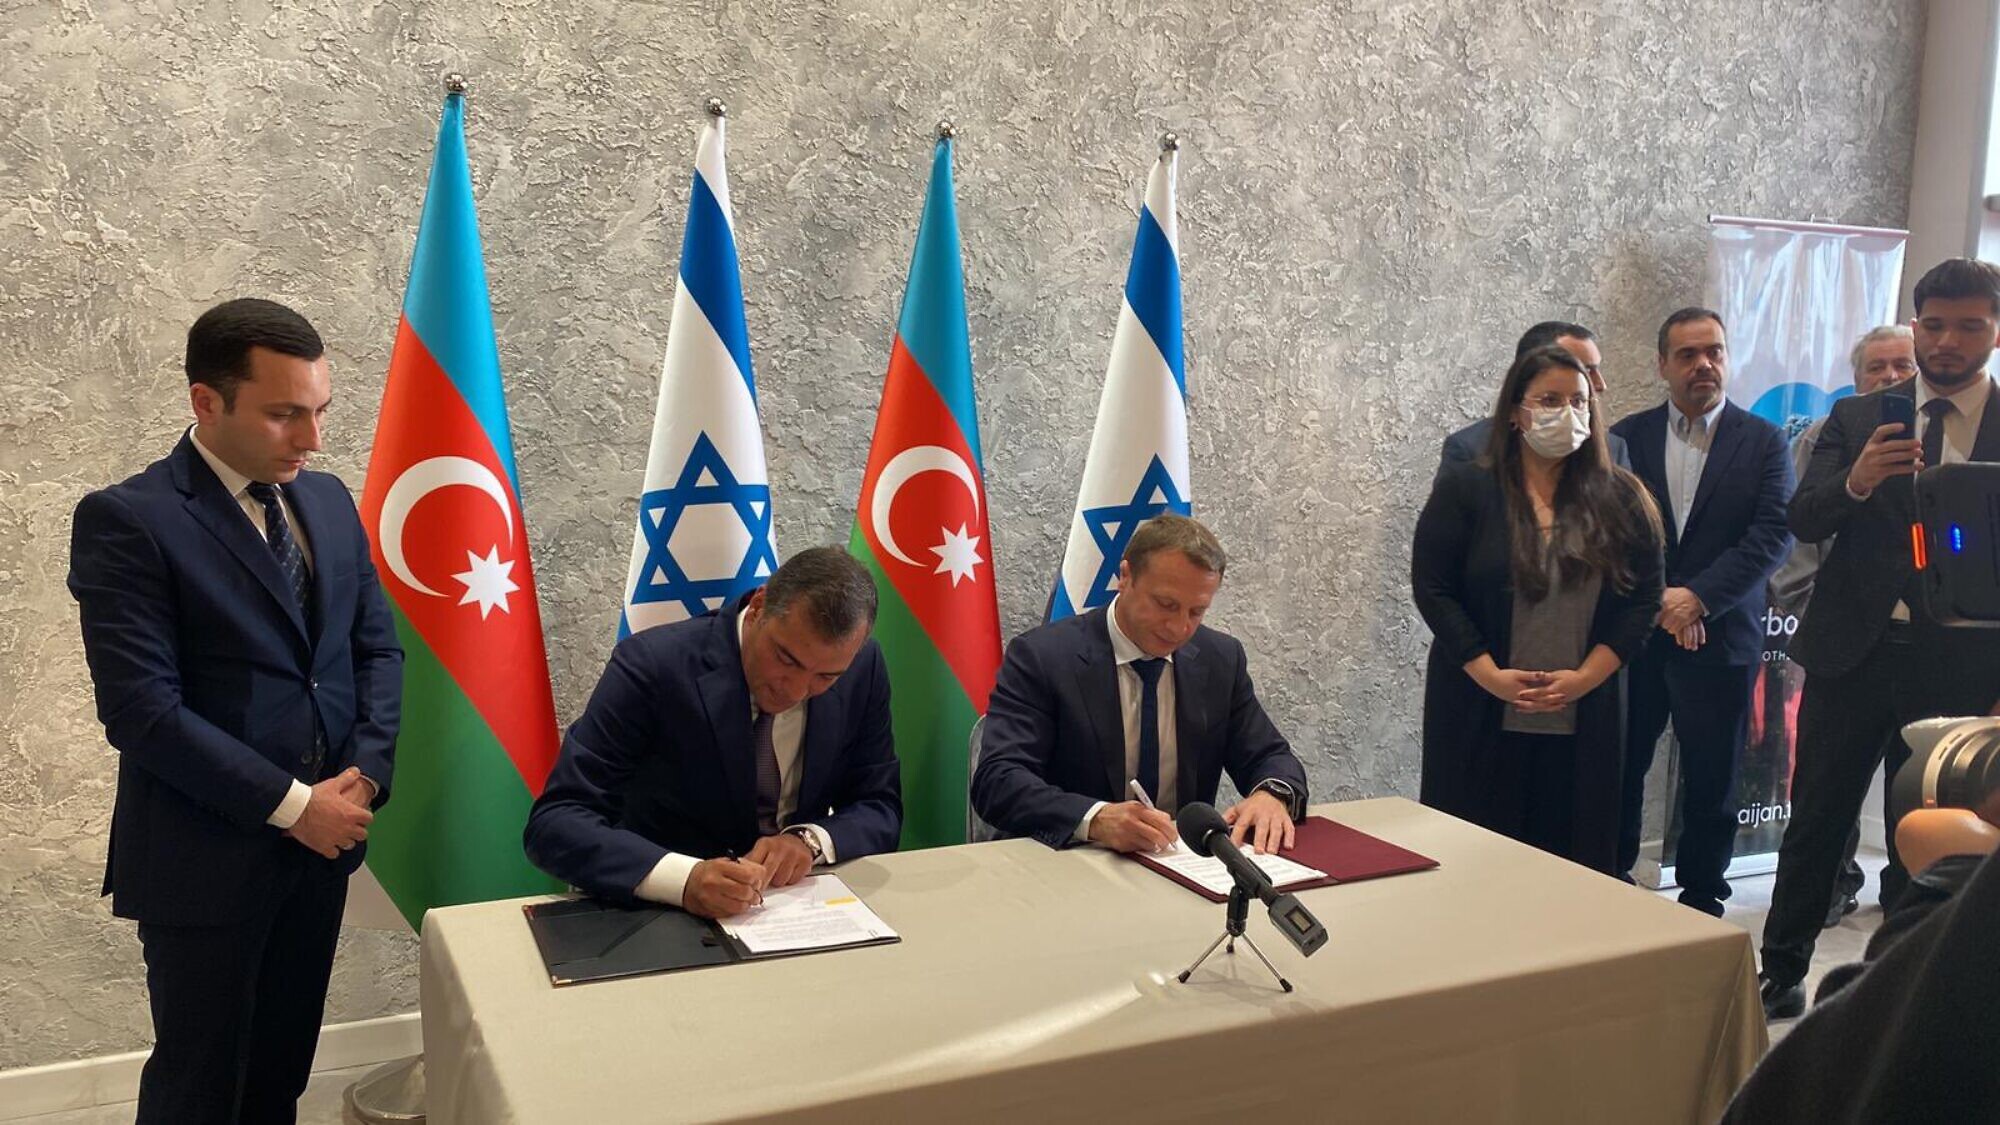 An agreement to cooperate in the field of tourism was signed by the chairman of the State Tourism Agency of Azerbaijan Fuad Naghiyev and Israel’s Minister of Tourism Yoel Razvozov on March 30, 2022. Source: Twitter.